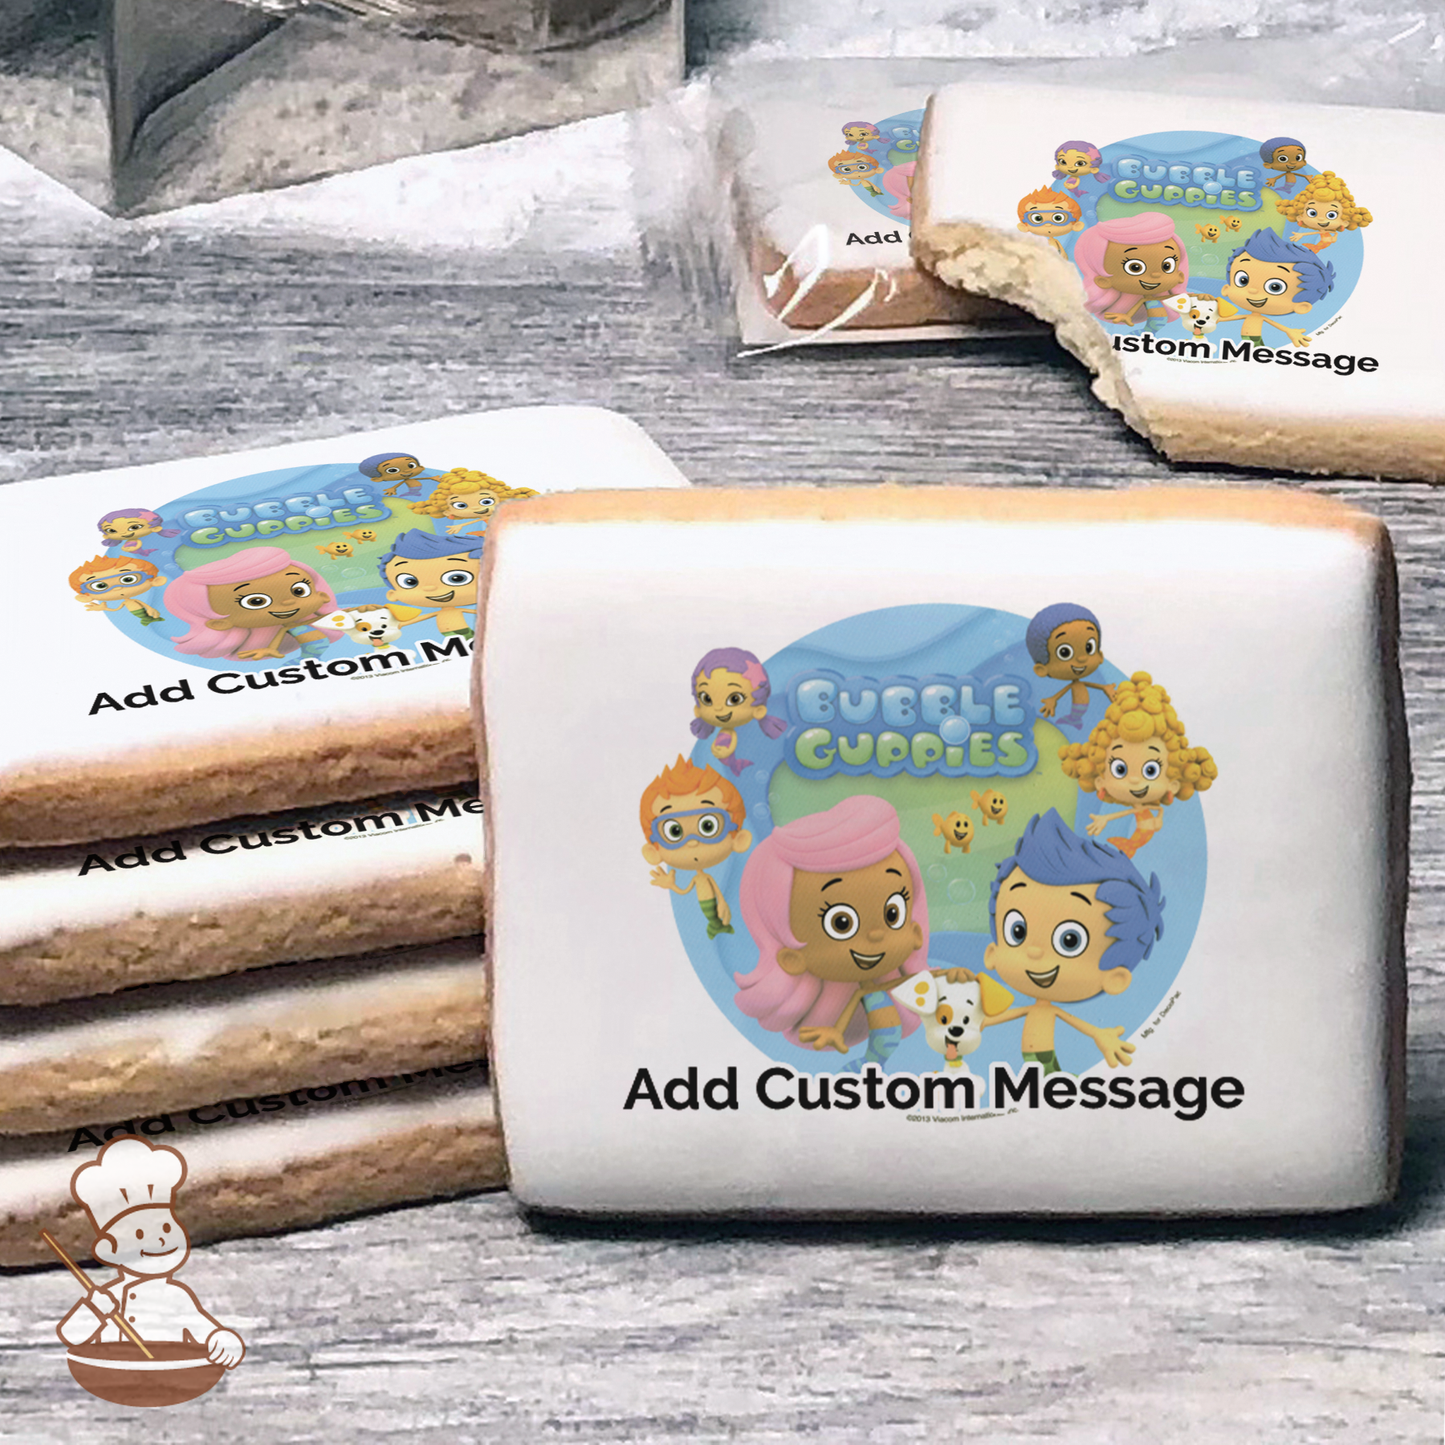 Bubble Guppies Gil and Molly Custom Message Cookies (Rectangle)